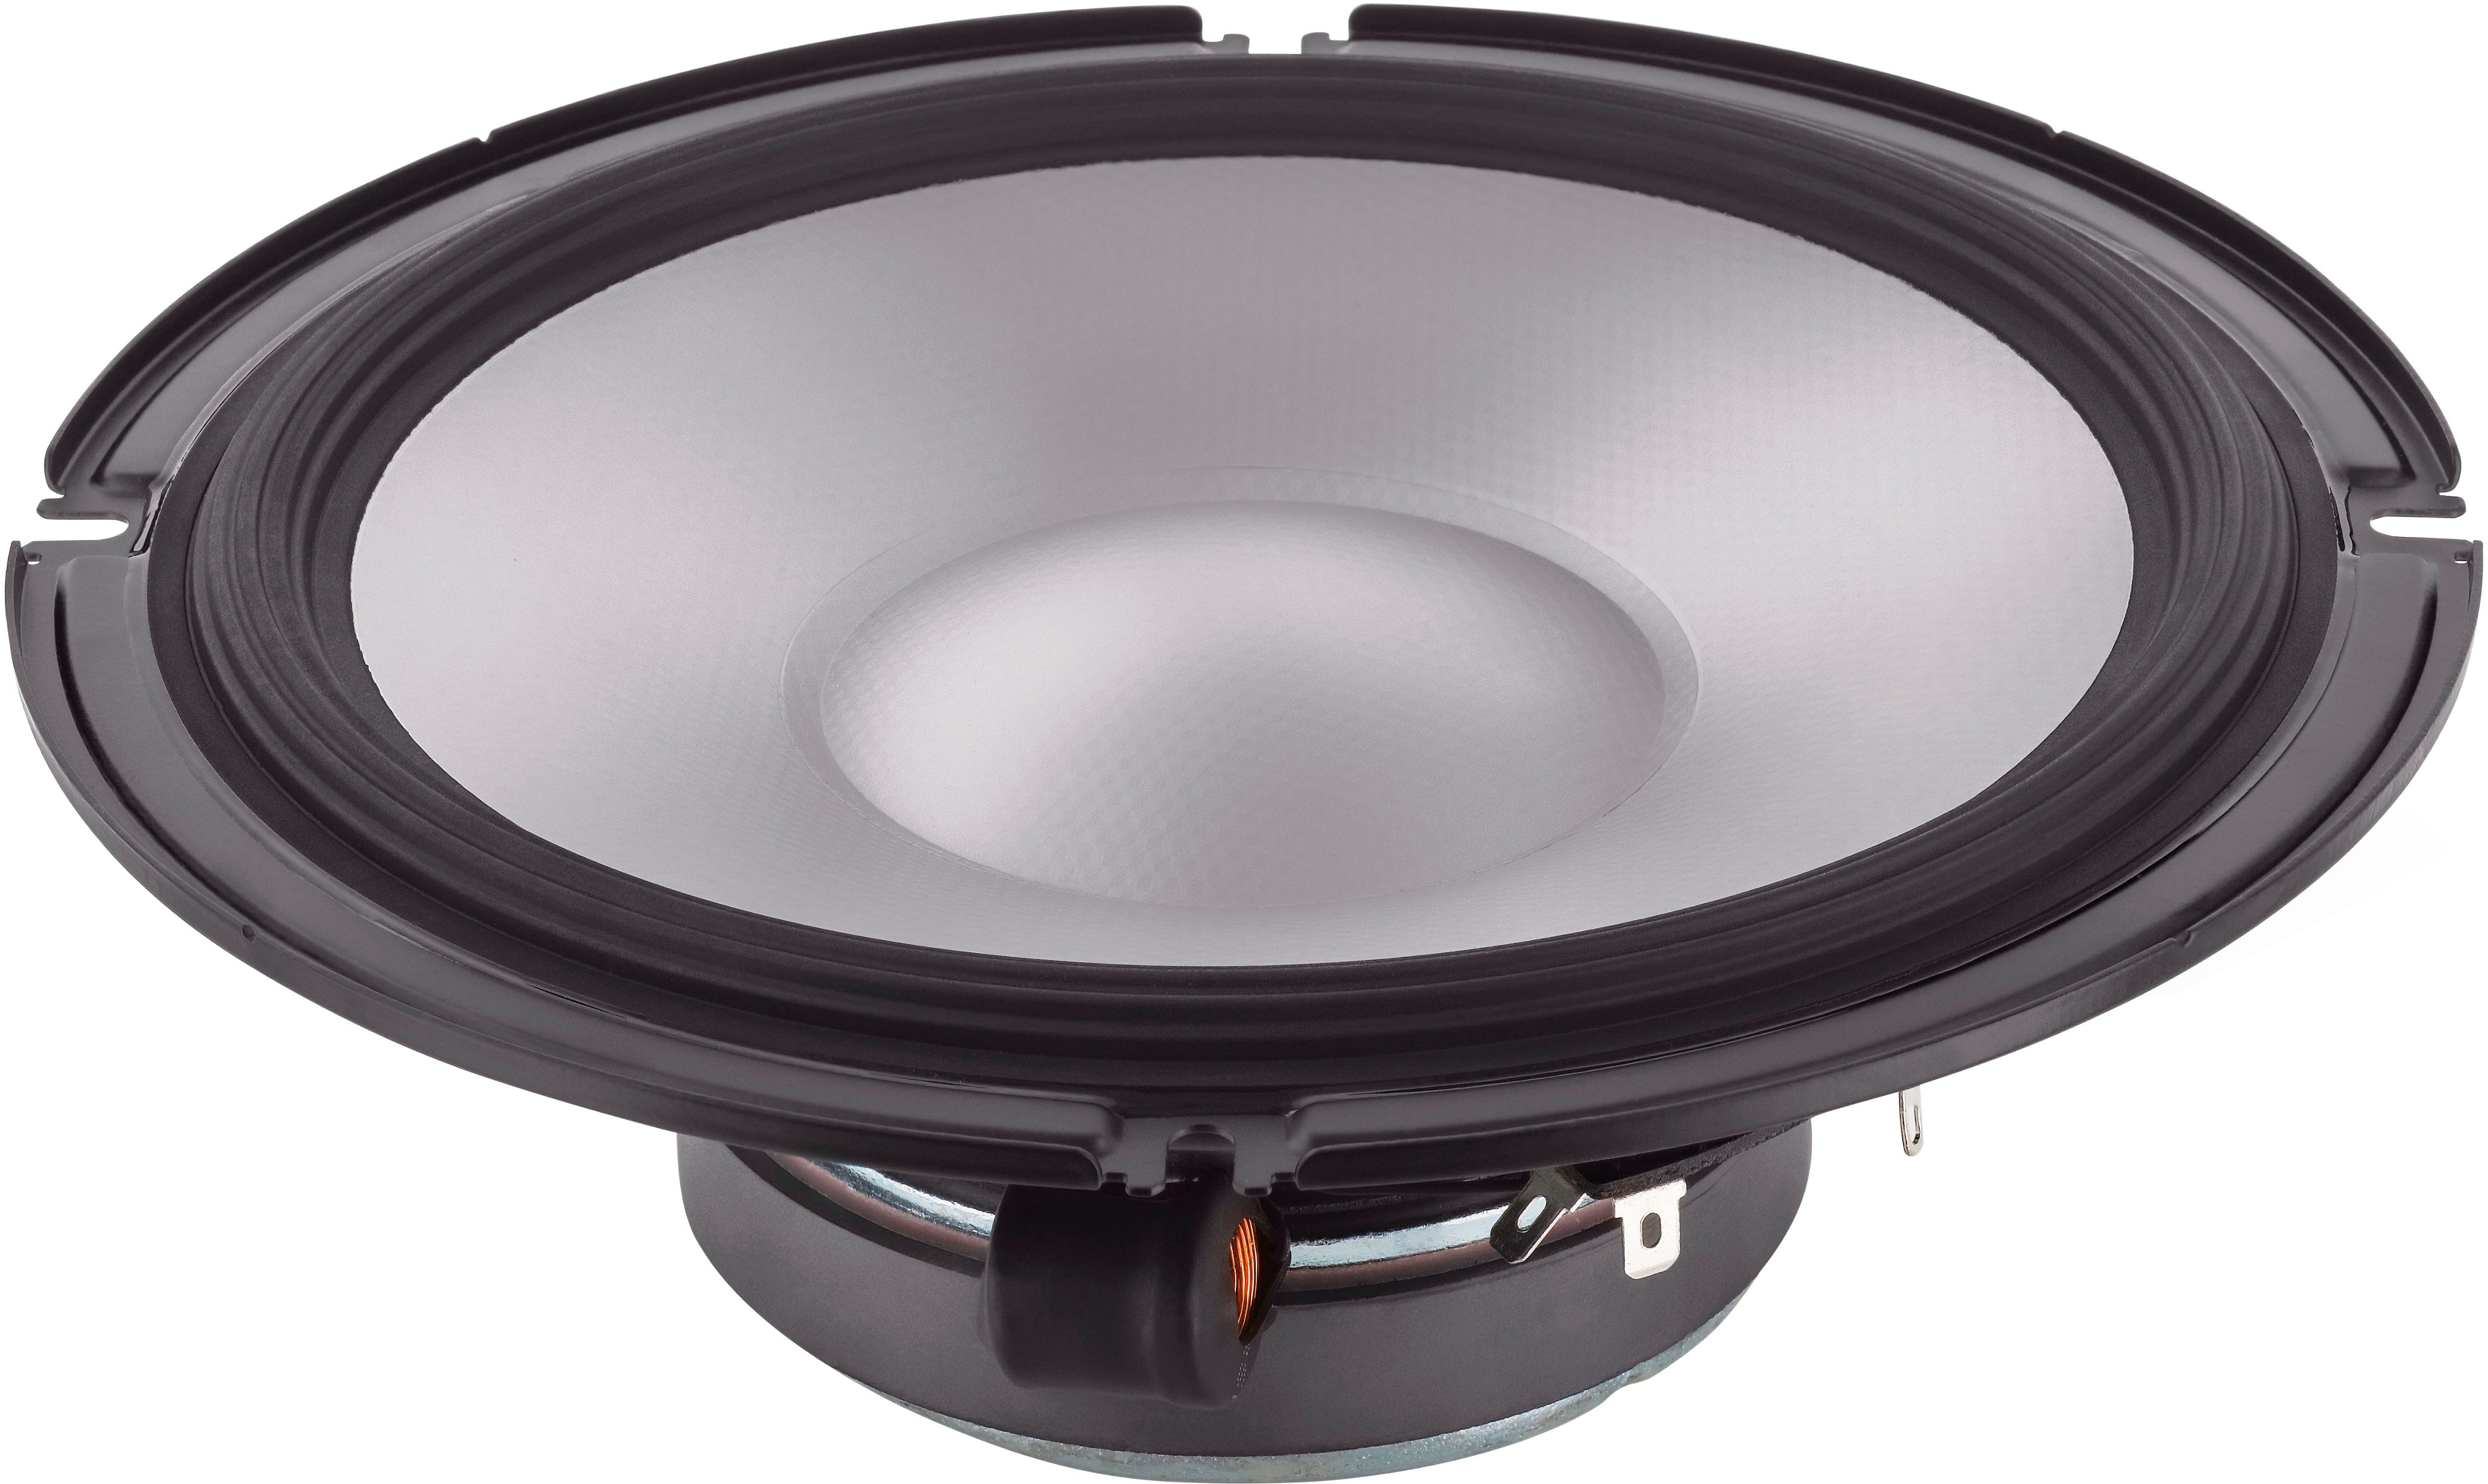 Angle View: MB Quart - NAUTIC 6-1/2" 2-Way Marine Speakers with Composite Polypropylene Cones (Pair) - White